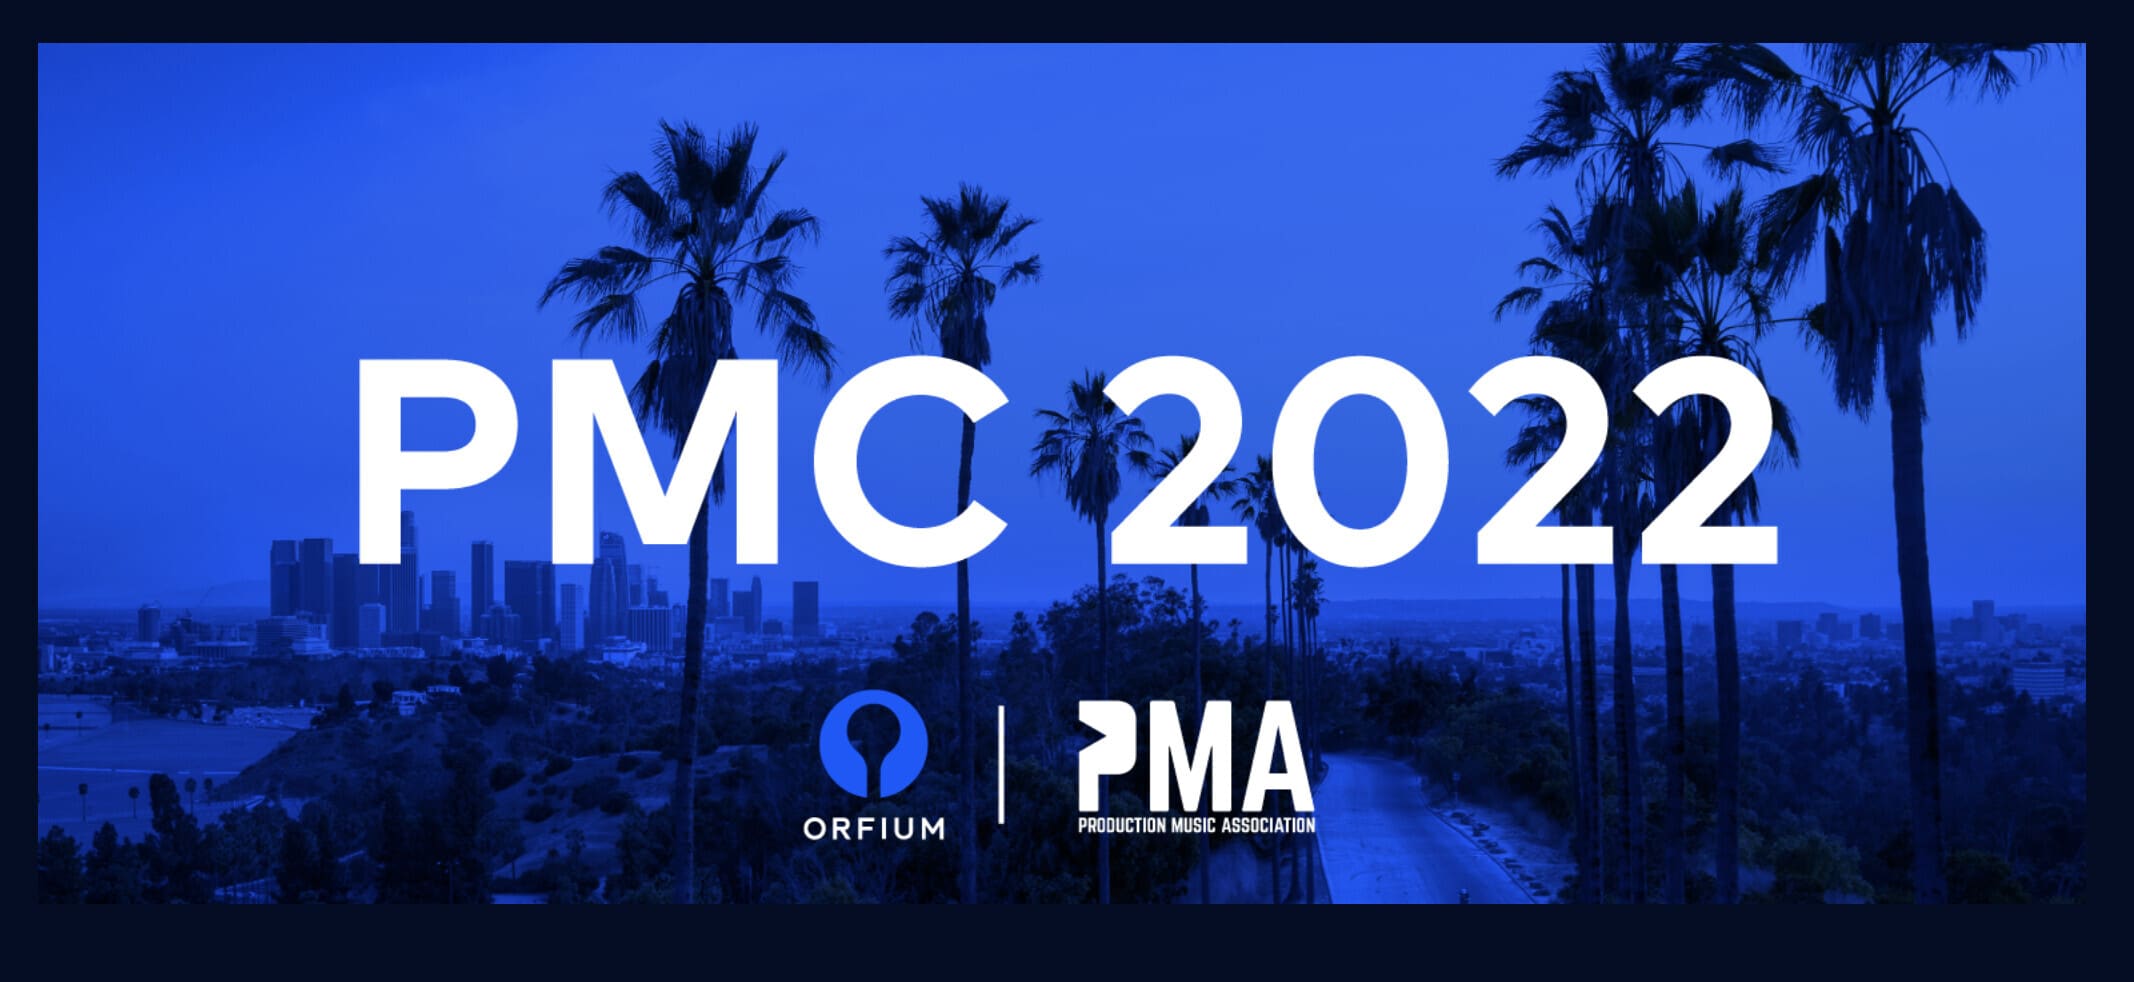 See you in LA at the Production Music Conference this week!